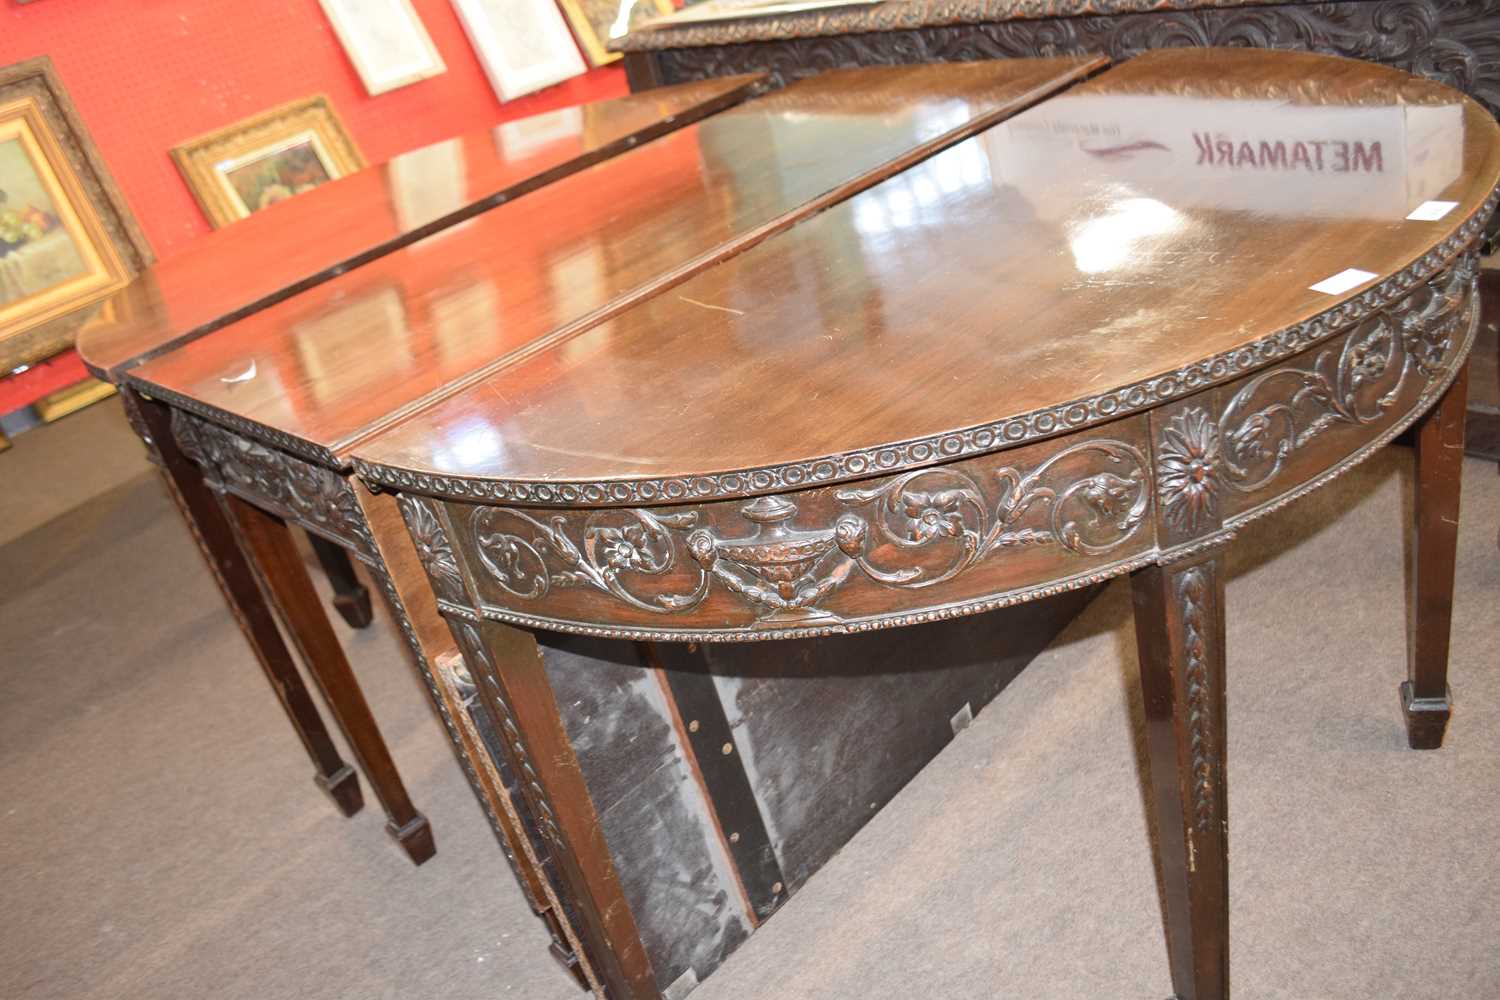 An Adams style mahogany sectional dining table formed of two ends, a central drop leaf section and a - Image 2 of 2